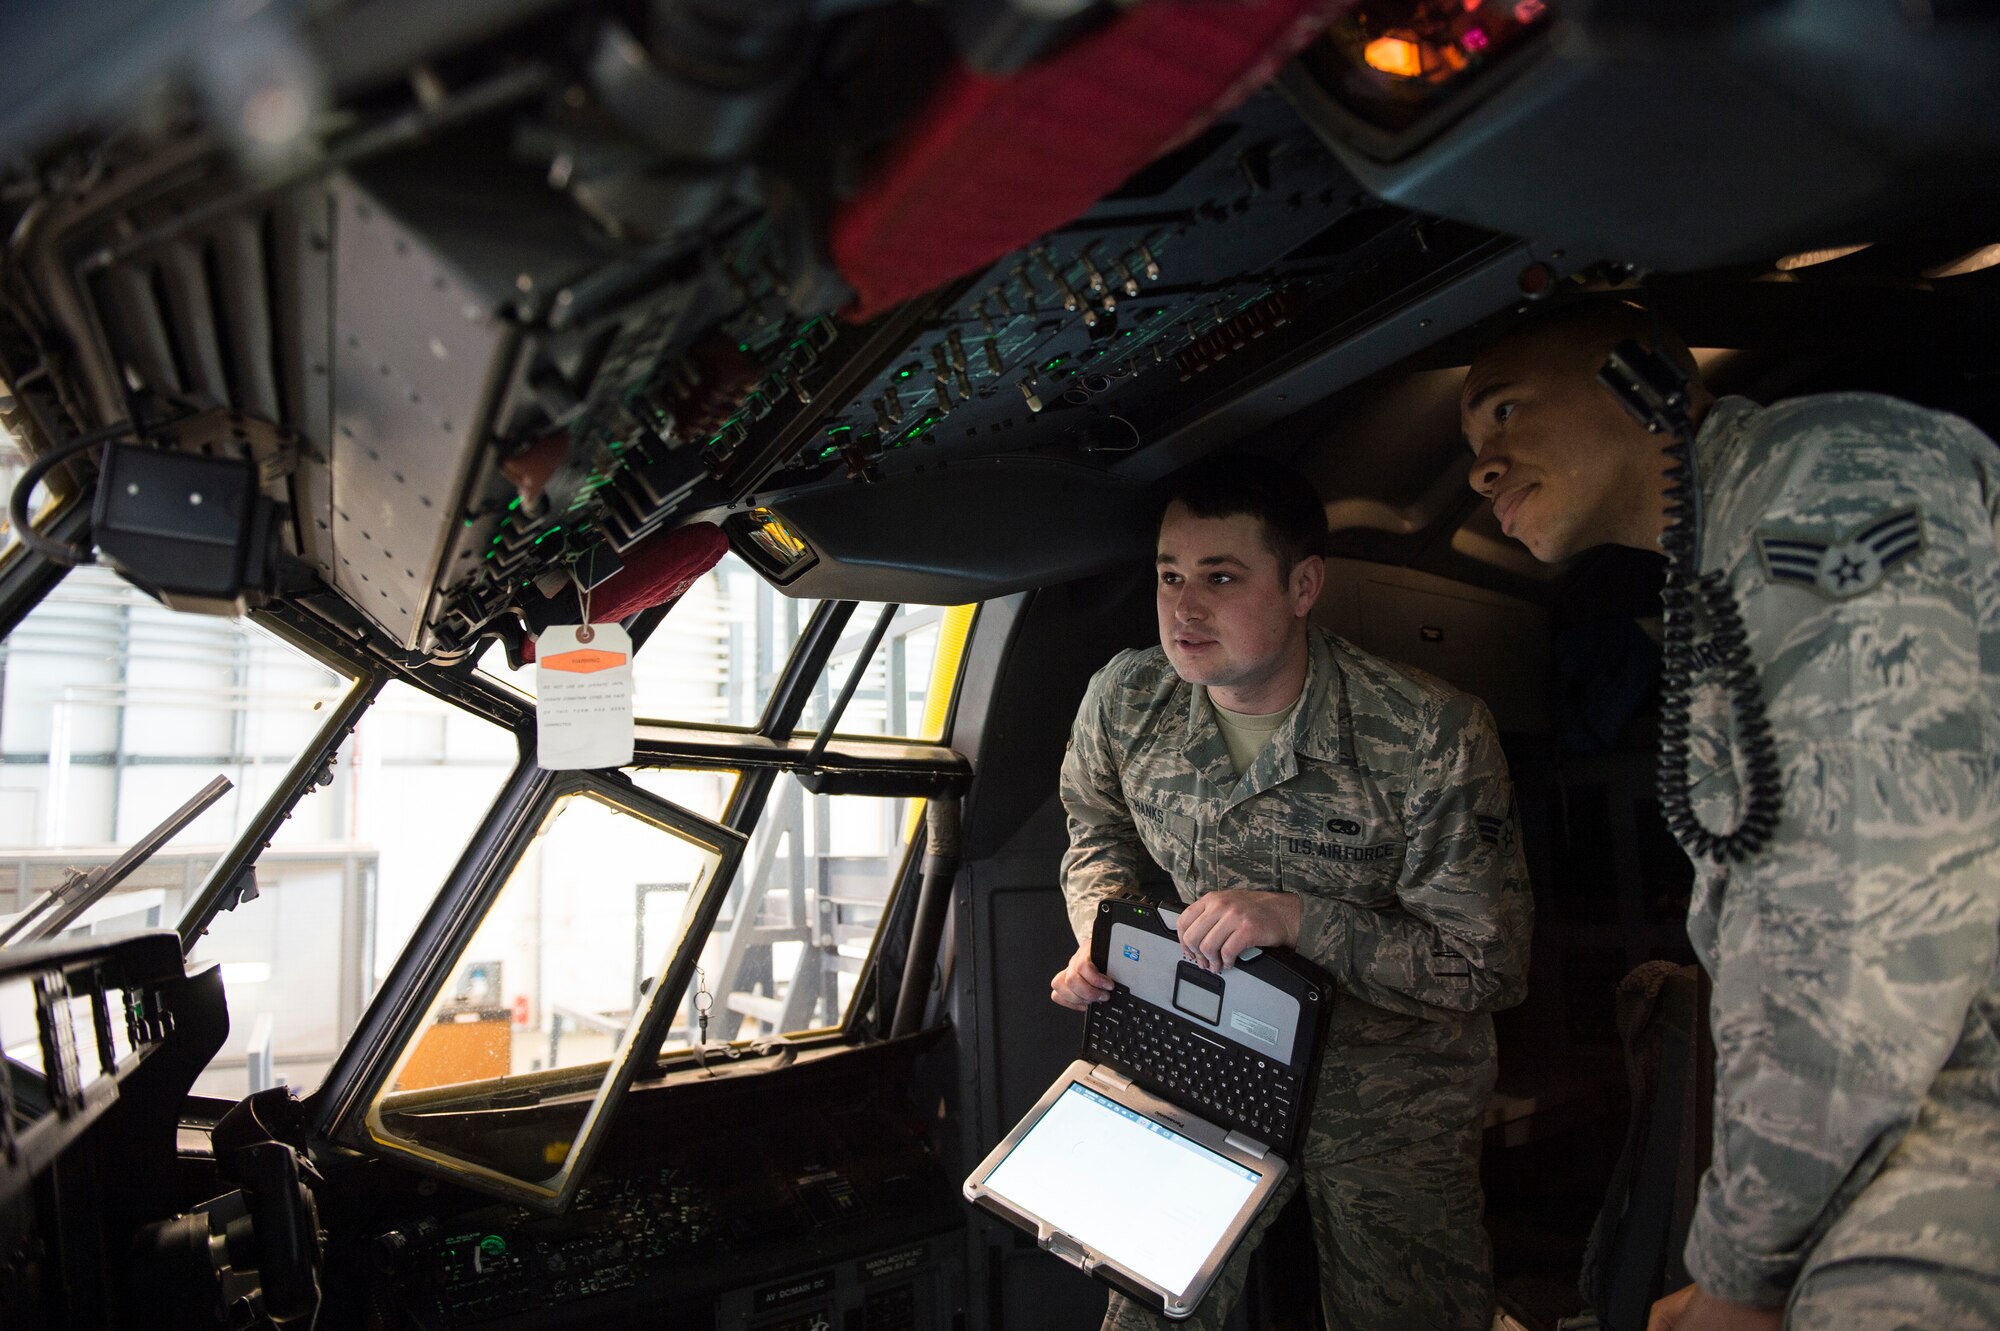 U.S. Airmen assigned to the 86th Maintenance Squadron test the computer systems of a C-130J Super Hercules cockpit on Ramstein Air Base, Germany, April 10, 2018. Due to their frequent use, aircraft require periodic inspection and maintenance to ensure their reliability. (U.S. Air Force photo by Senior Airman Joshua Magbanua)